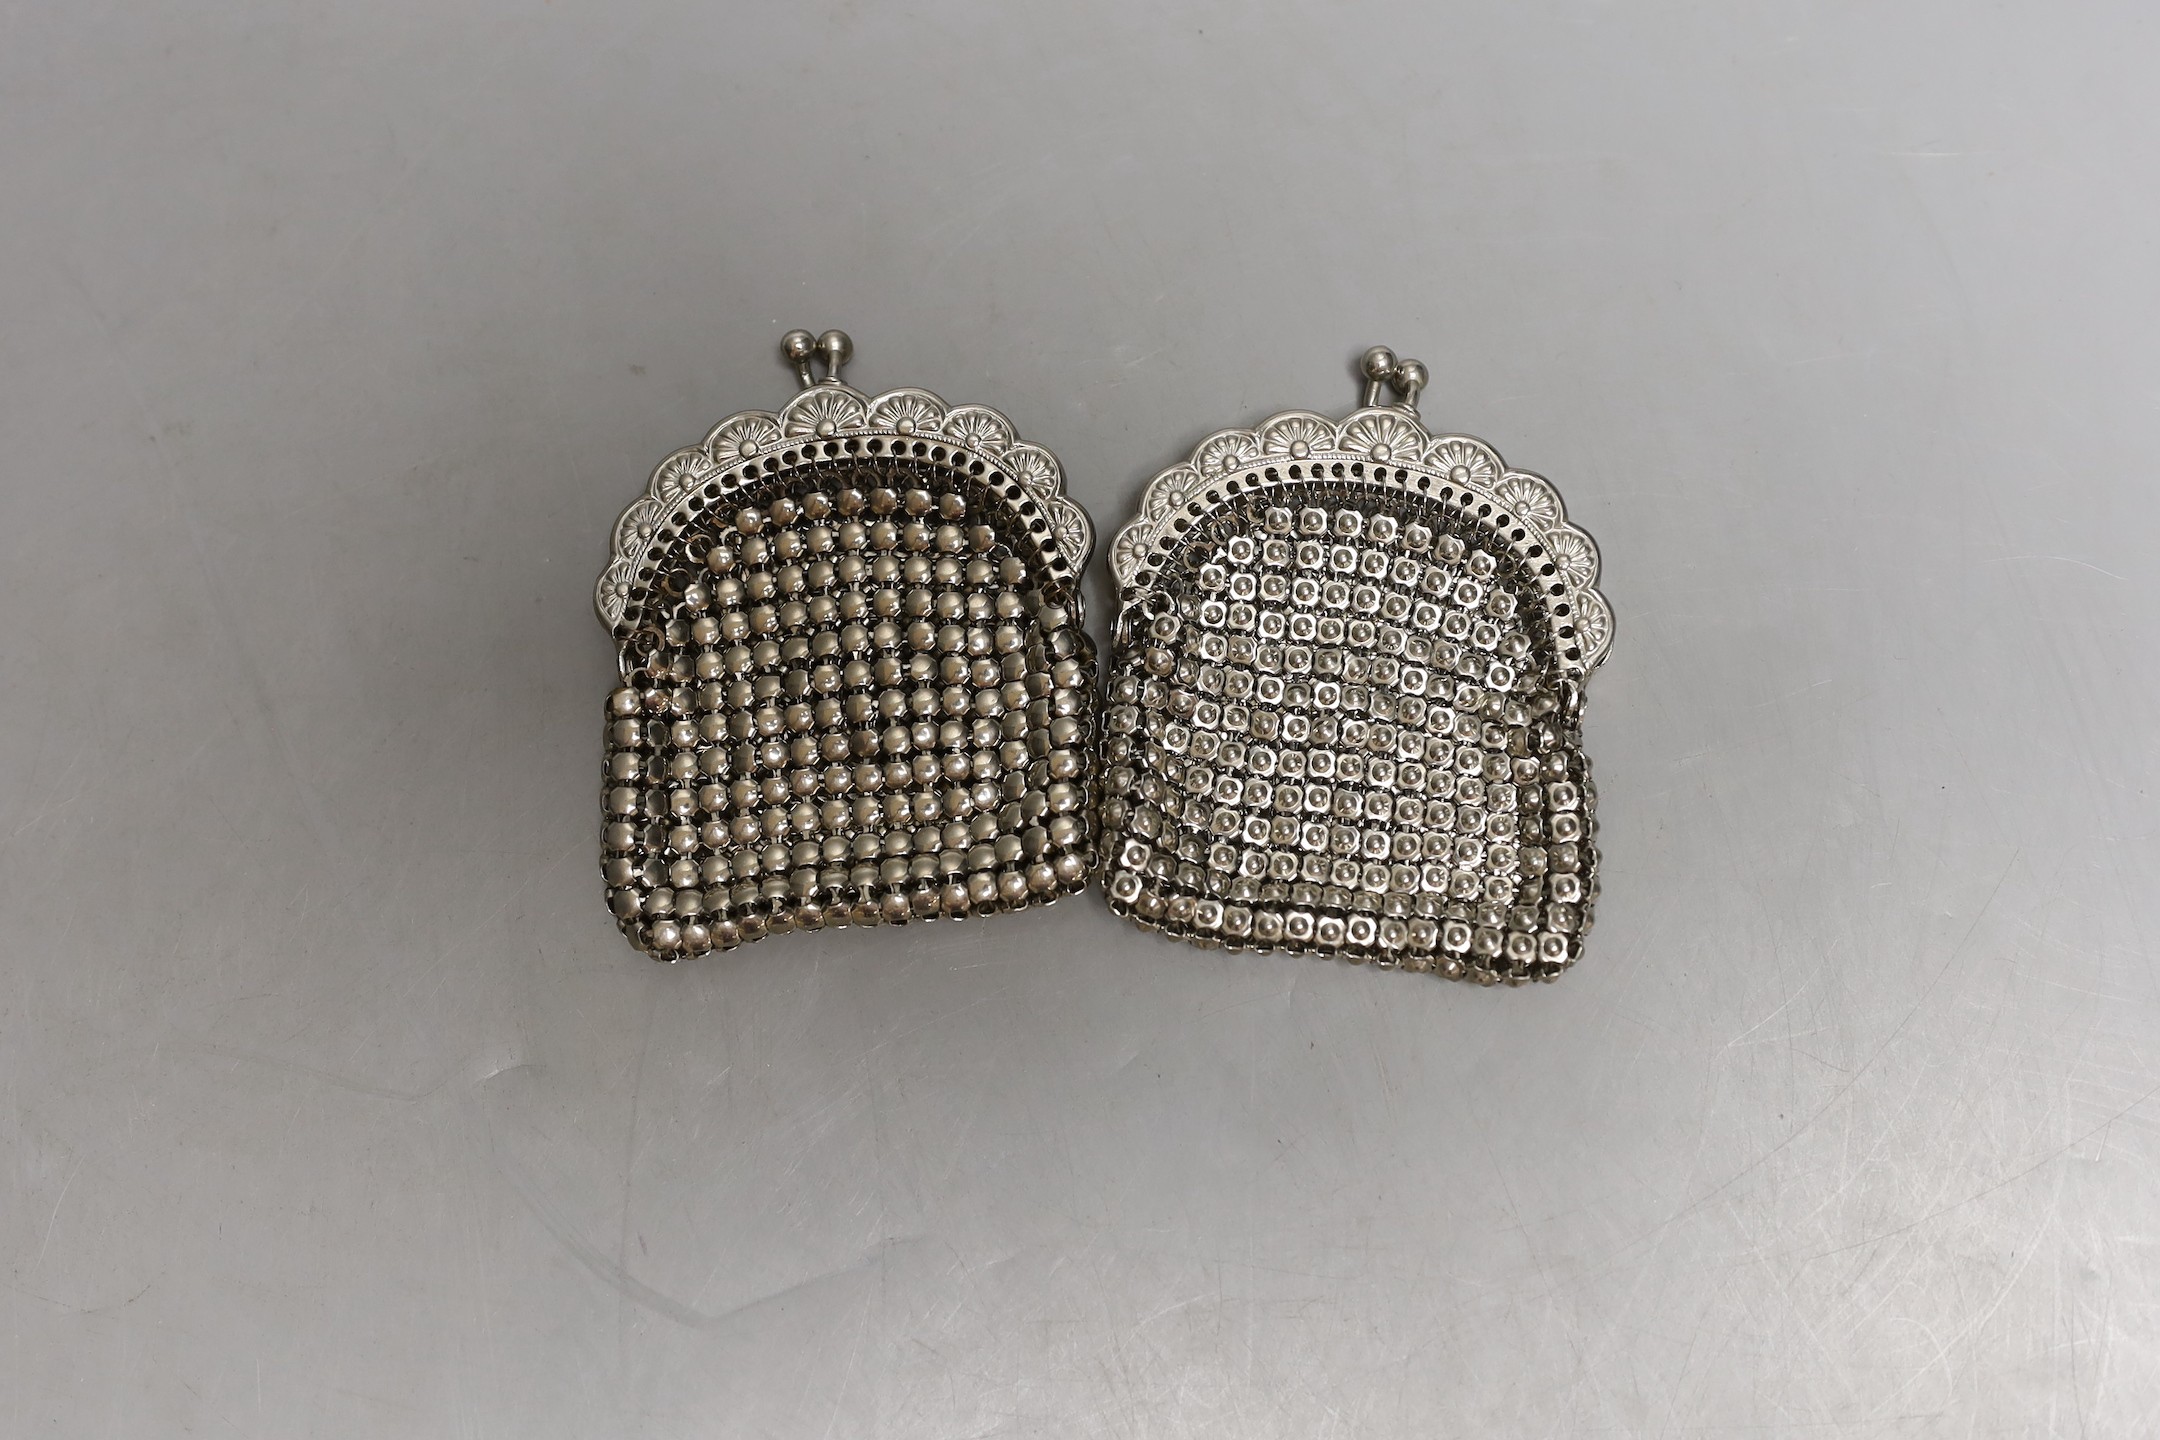 A chain mail metal evening bag and two similar purses.